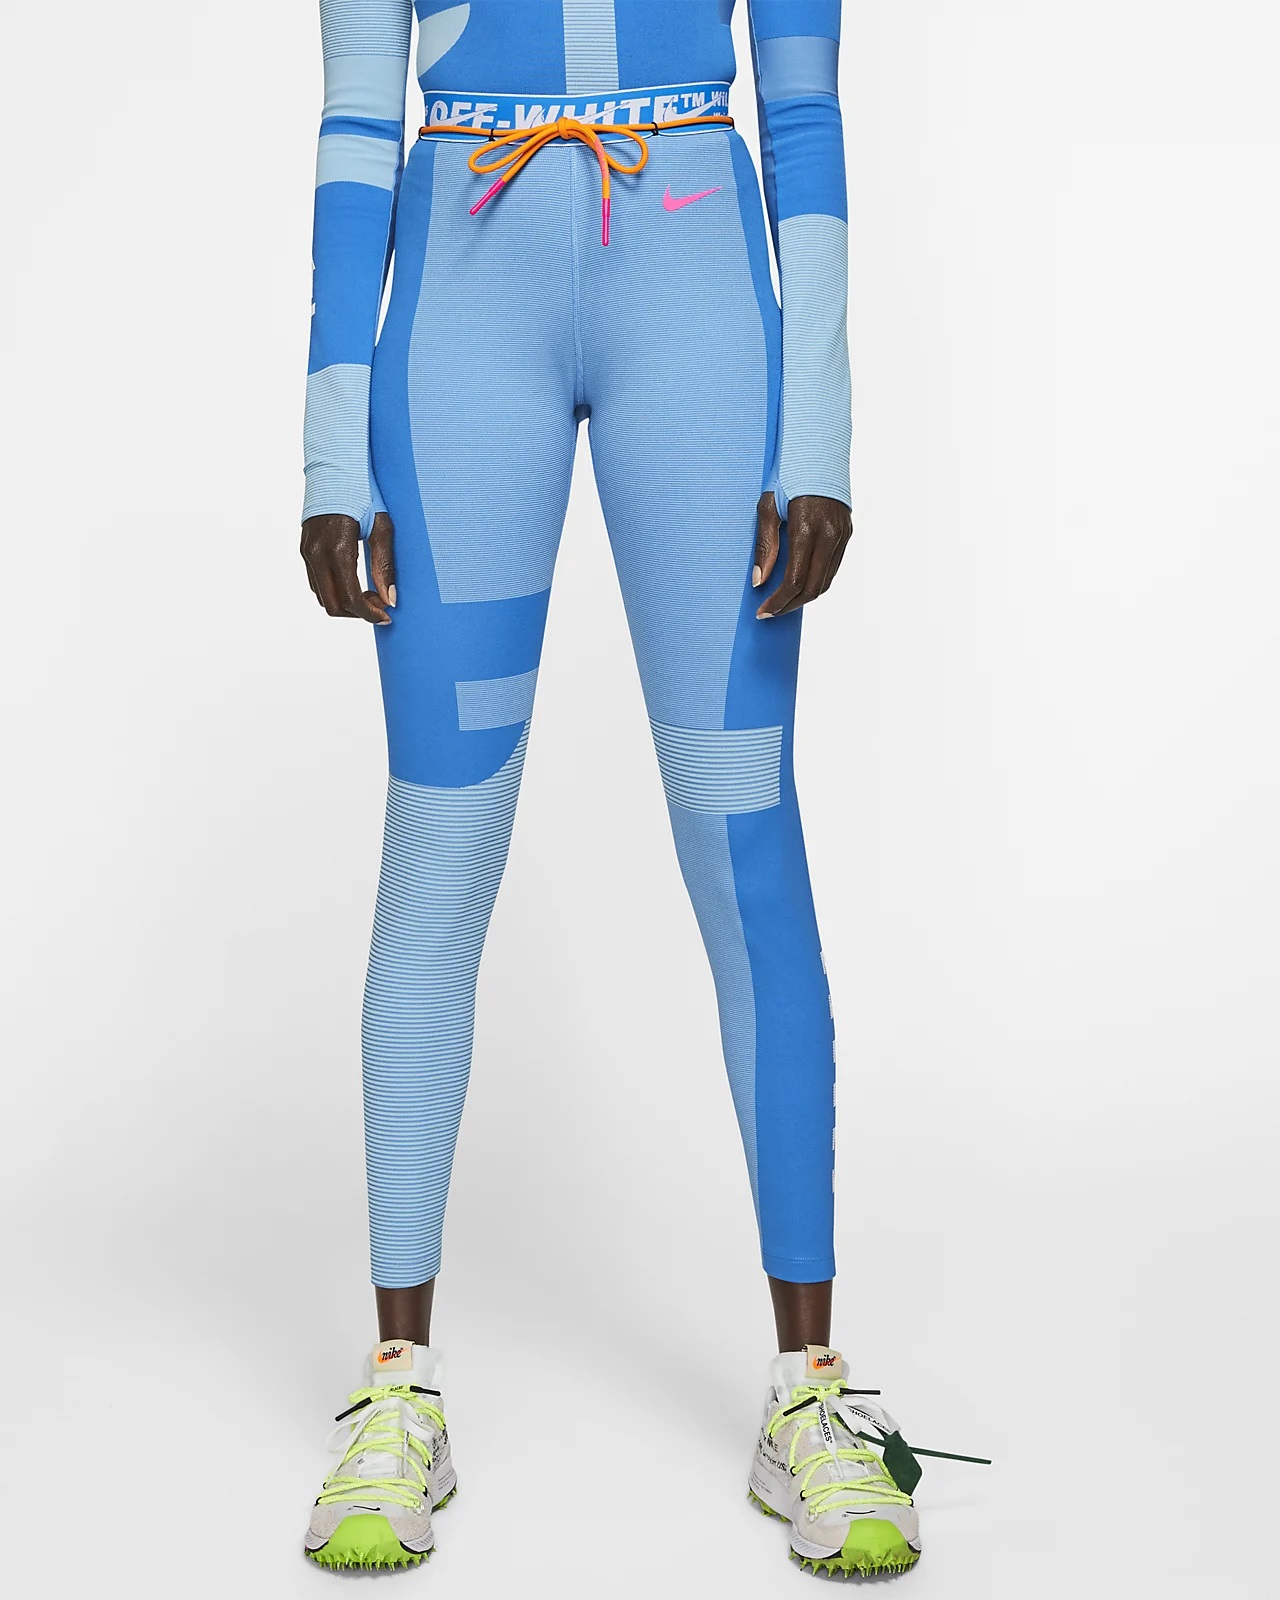 Nike And Off-White Release 'Athlete In Progress' Tights And Top | SNOBETTE